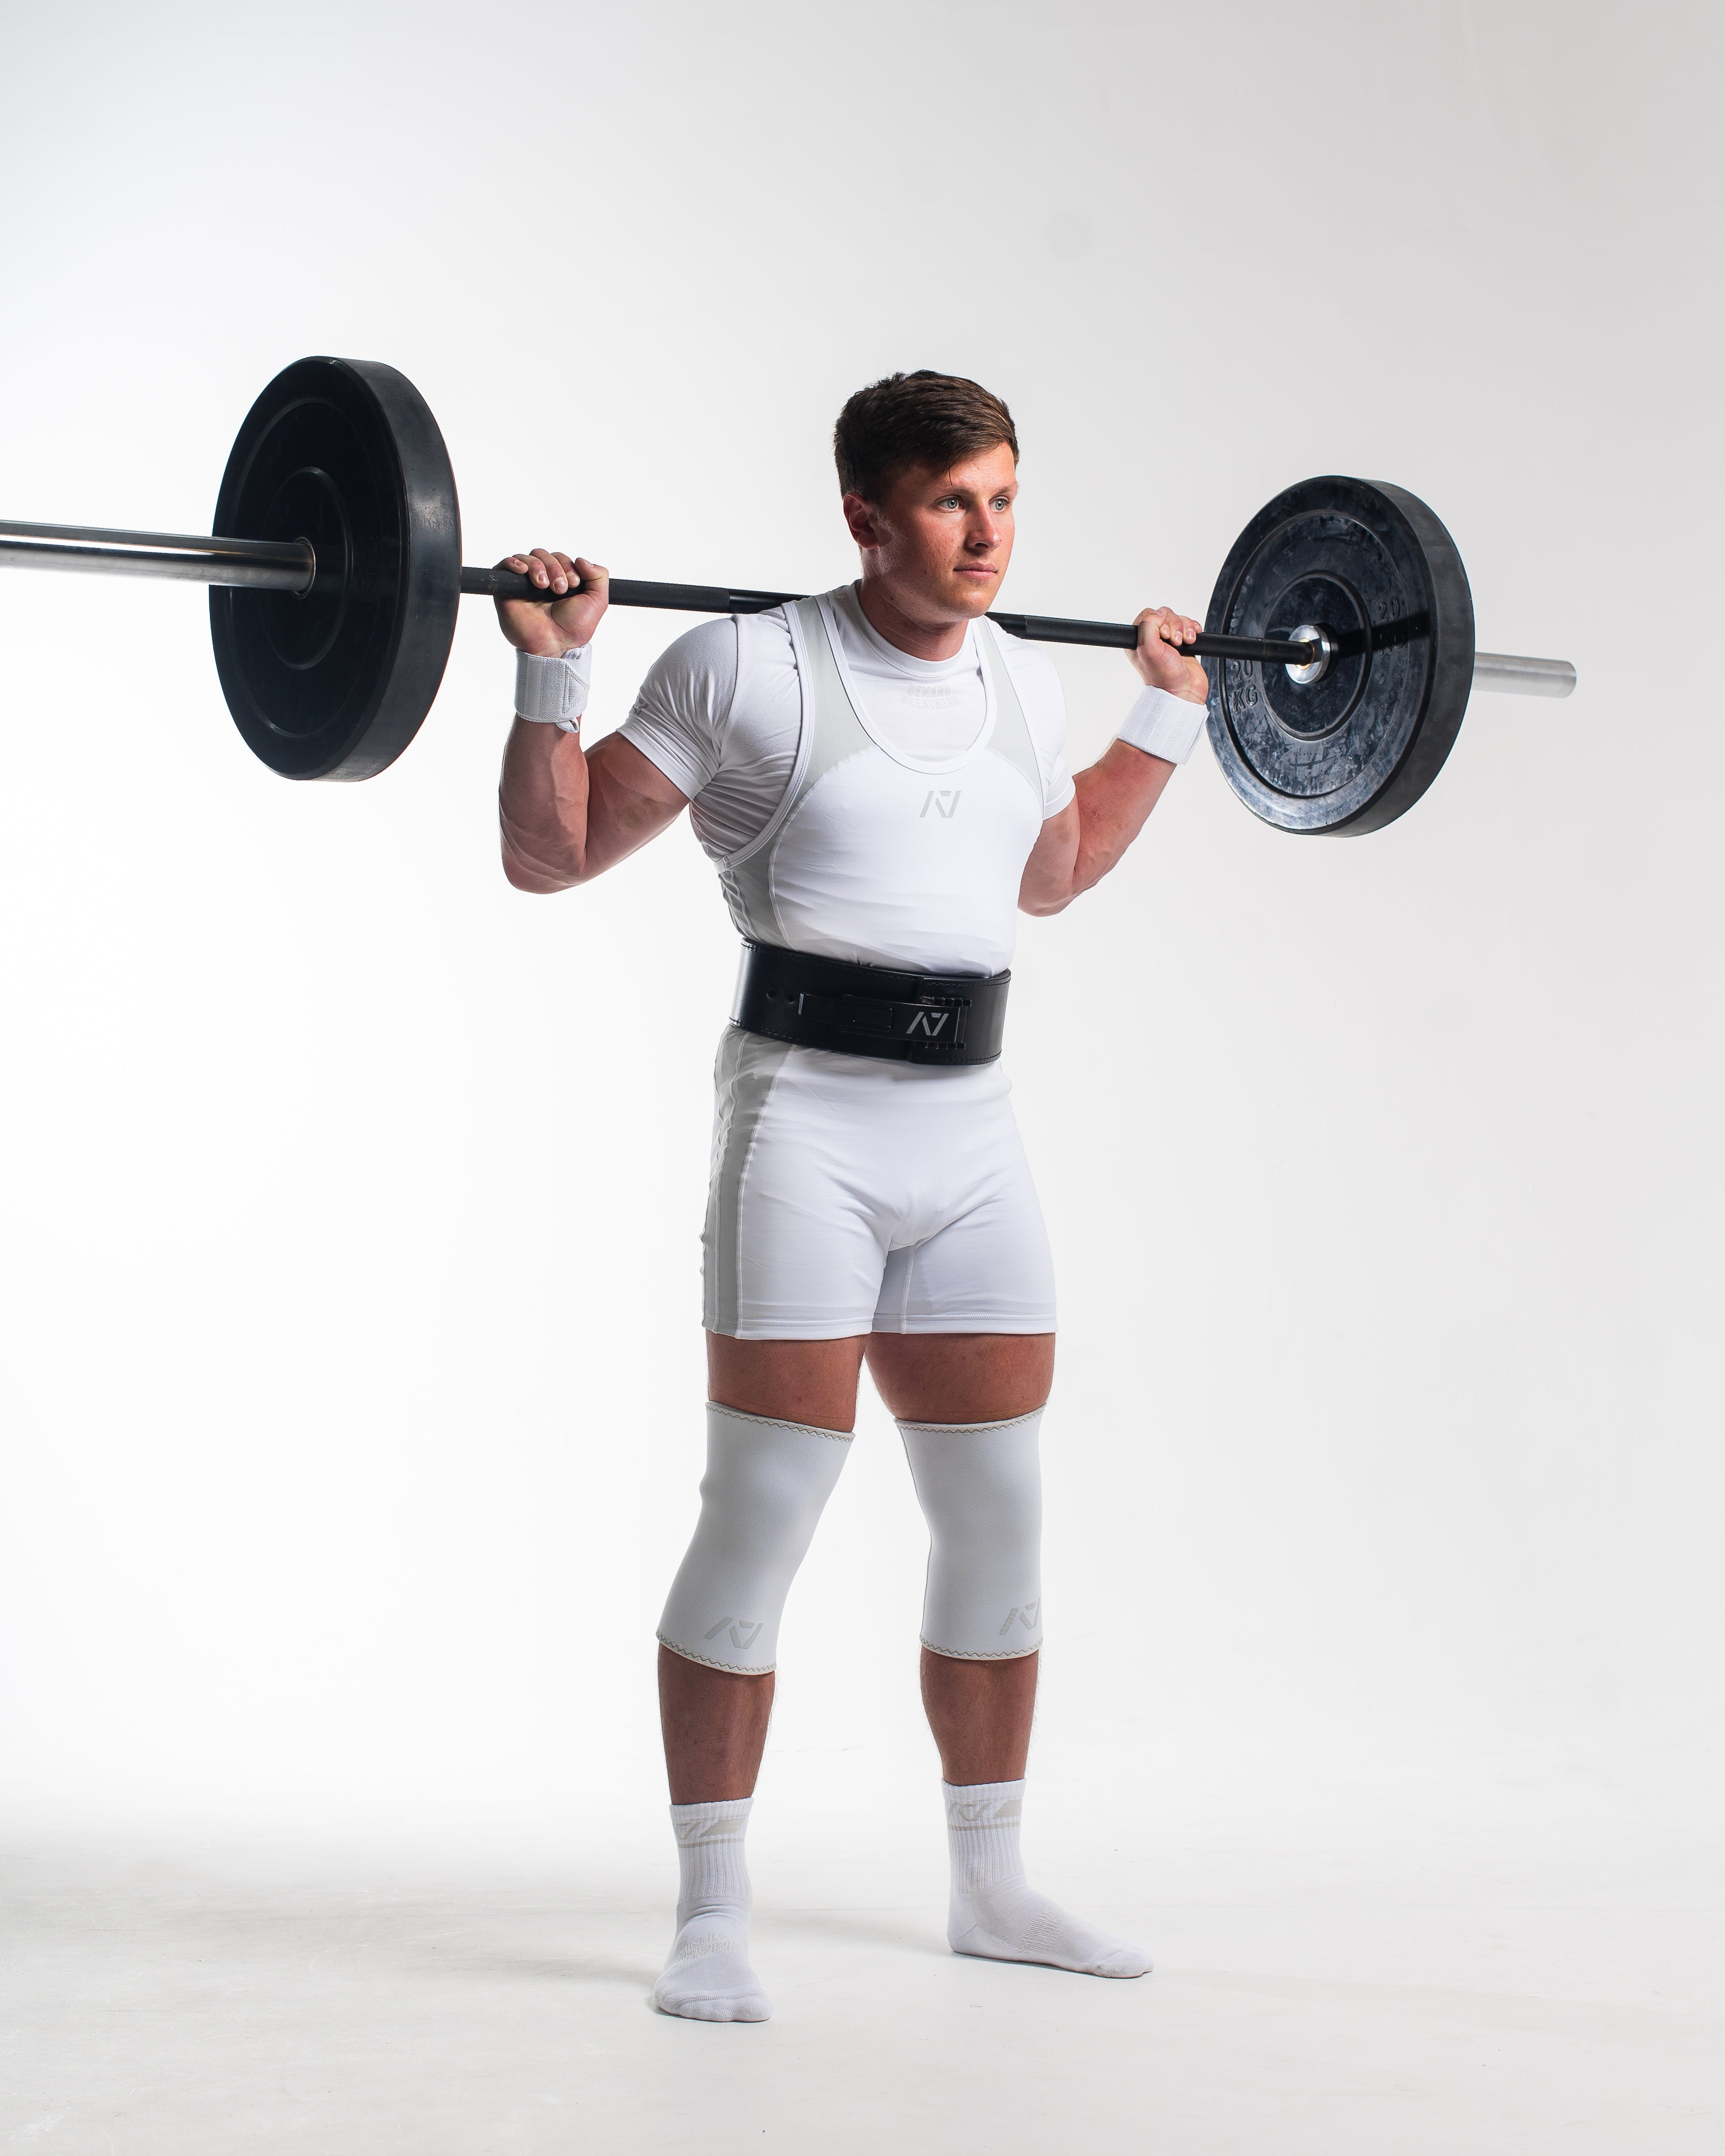 A7 IPF Approved Polar Luno singlet with extra lat mobility, side panel stitching to guide the squat depth level and curved panel design for a slimming look. The Women's cut singlet features a tapered waist and additional quad room. The IPF Approved Kit includes Powerlifting Singlet, A7 Meet Shirt, A7 Zebra Wrist Wraps, A7 Deadlift Socks, Hourglass Knee Sleeves (Stiff Knee Sleeves and Rigor Mortis Knee Sleeves). Genouillères powerlifting shipping to France, Spain, Ireland, Germany, Italy, Sweden and EU. 